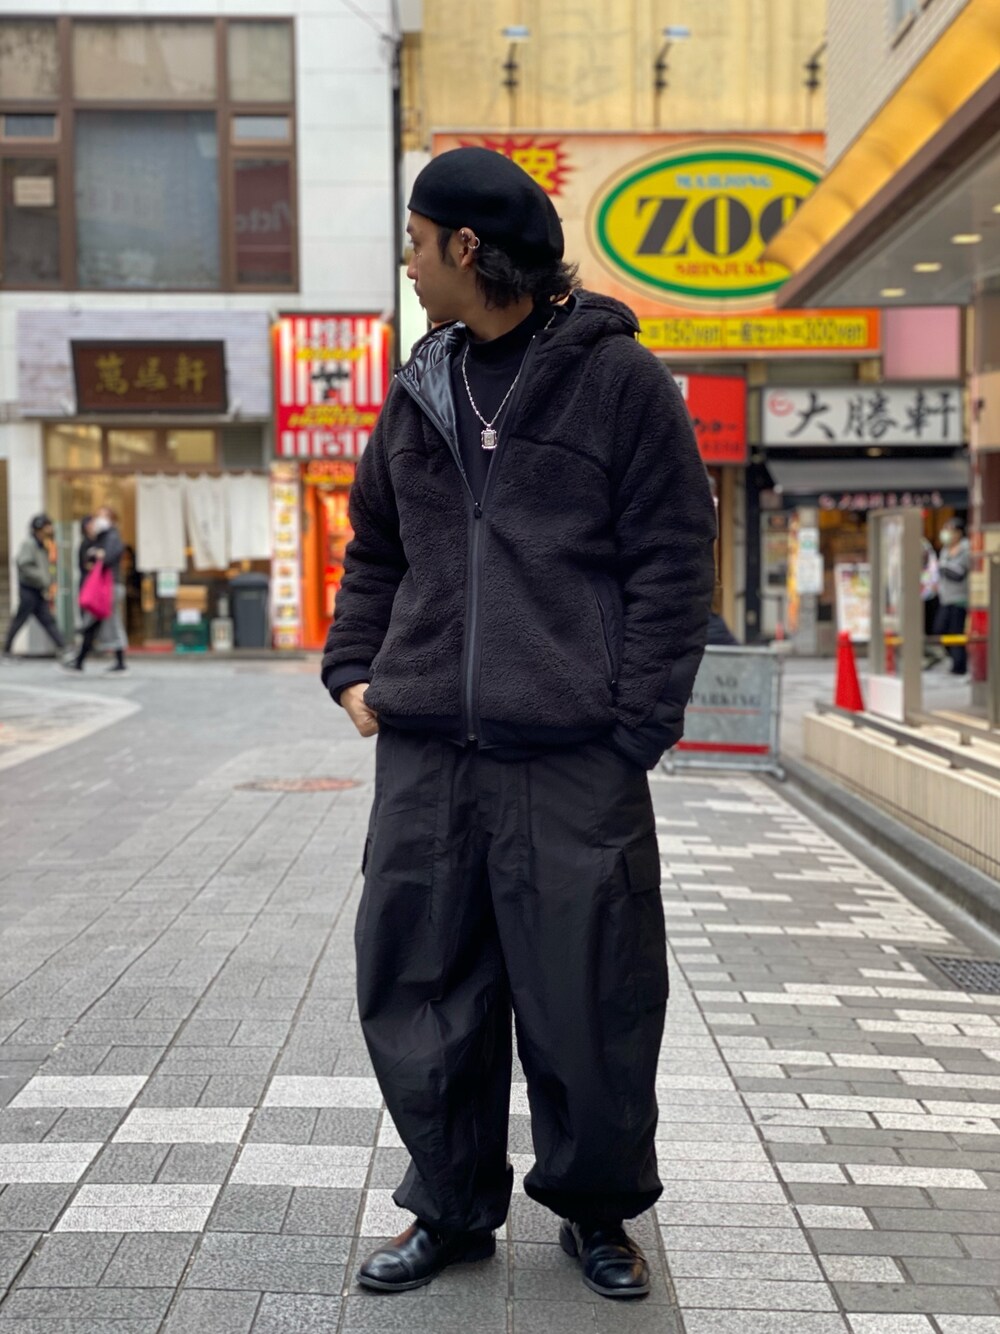 COMFY OUTDOORGARMENT　RABBITHOODIEREVERSE購入してから１度着用しました